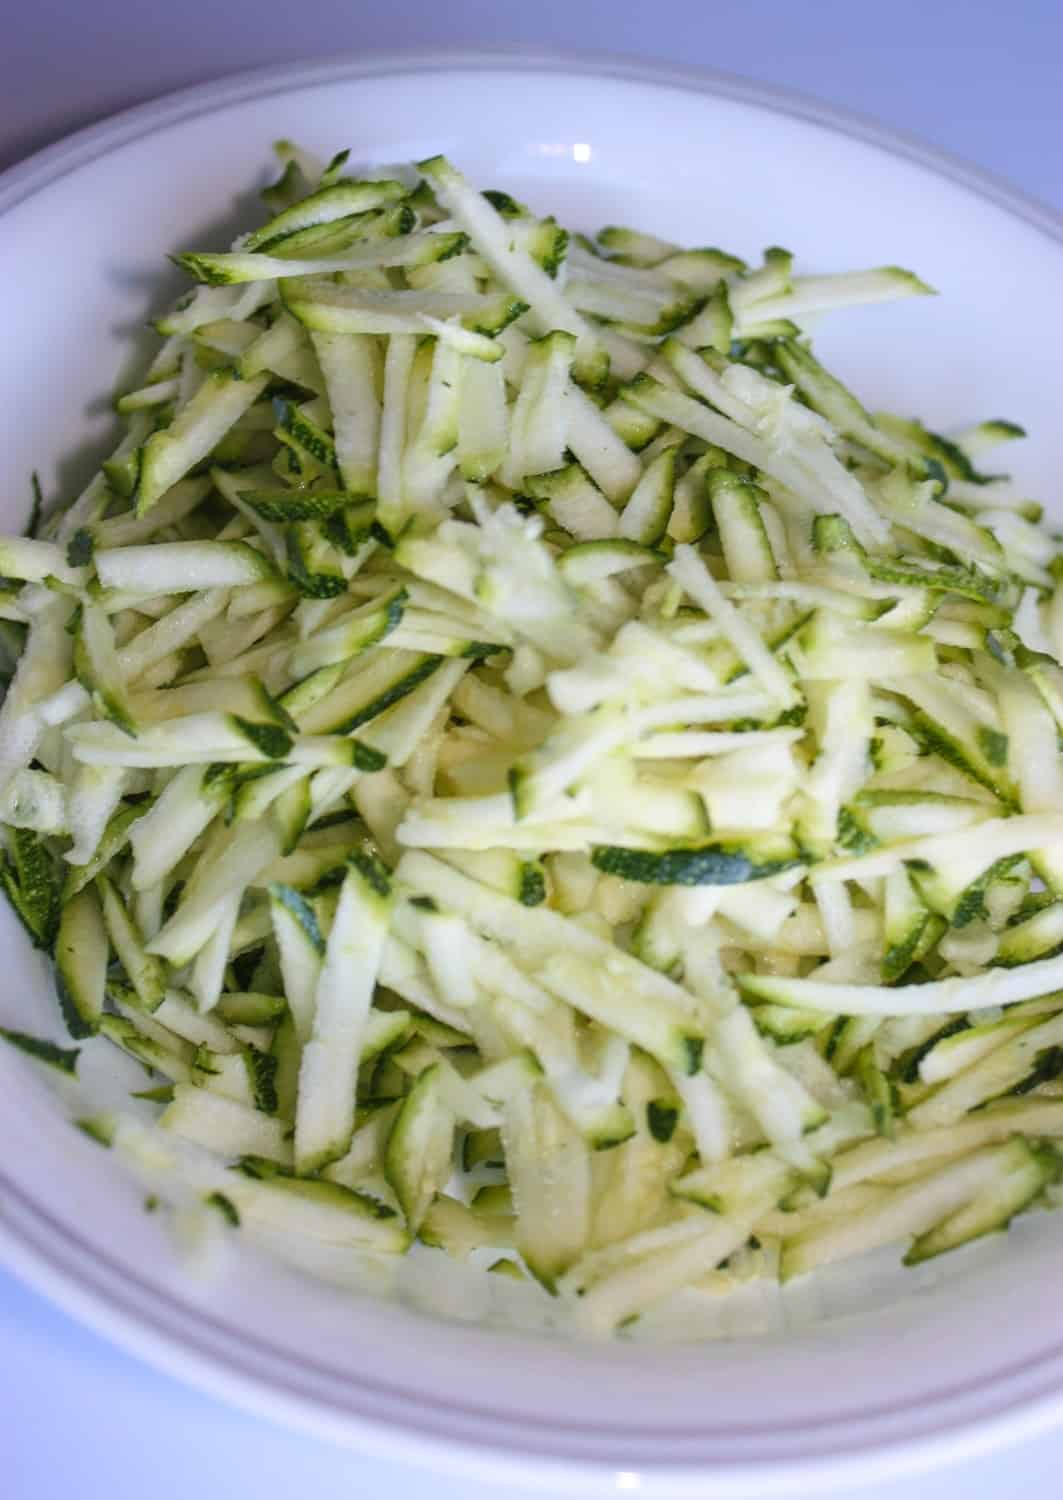 The grated zucchini.